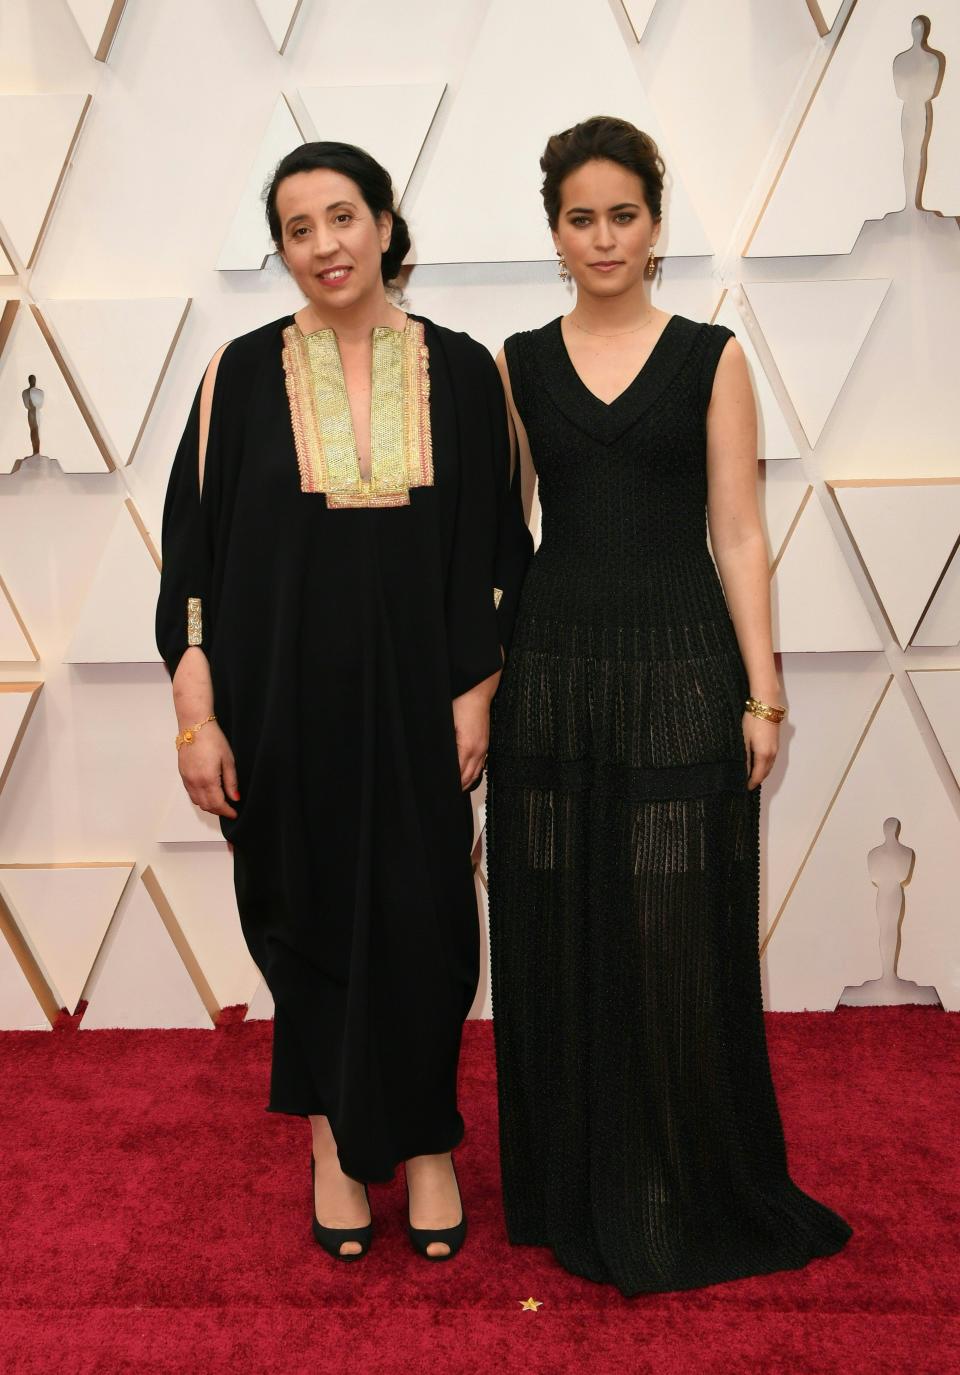 Nominee for "Brotherhood" Meryam Joobeur and a guest arrive for the 92nd Oscars at the Dolby Theatre in Hollywood, California on February 9, 2020. (Photo by Robyn Beck / AFP) (Photo by ROBYN BECK/AFP via Getty Images)